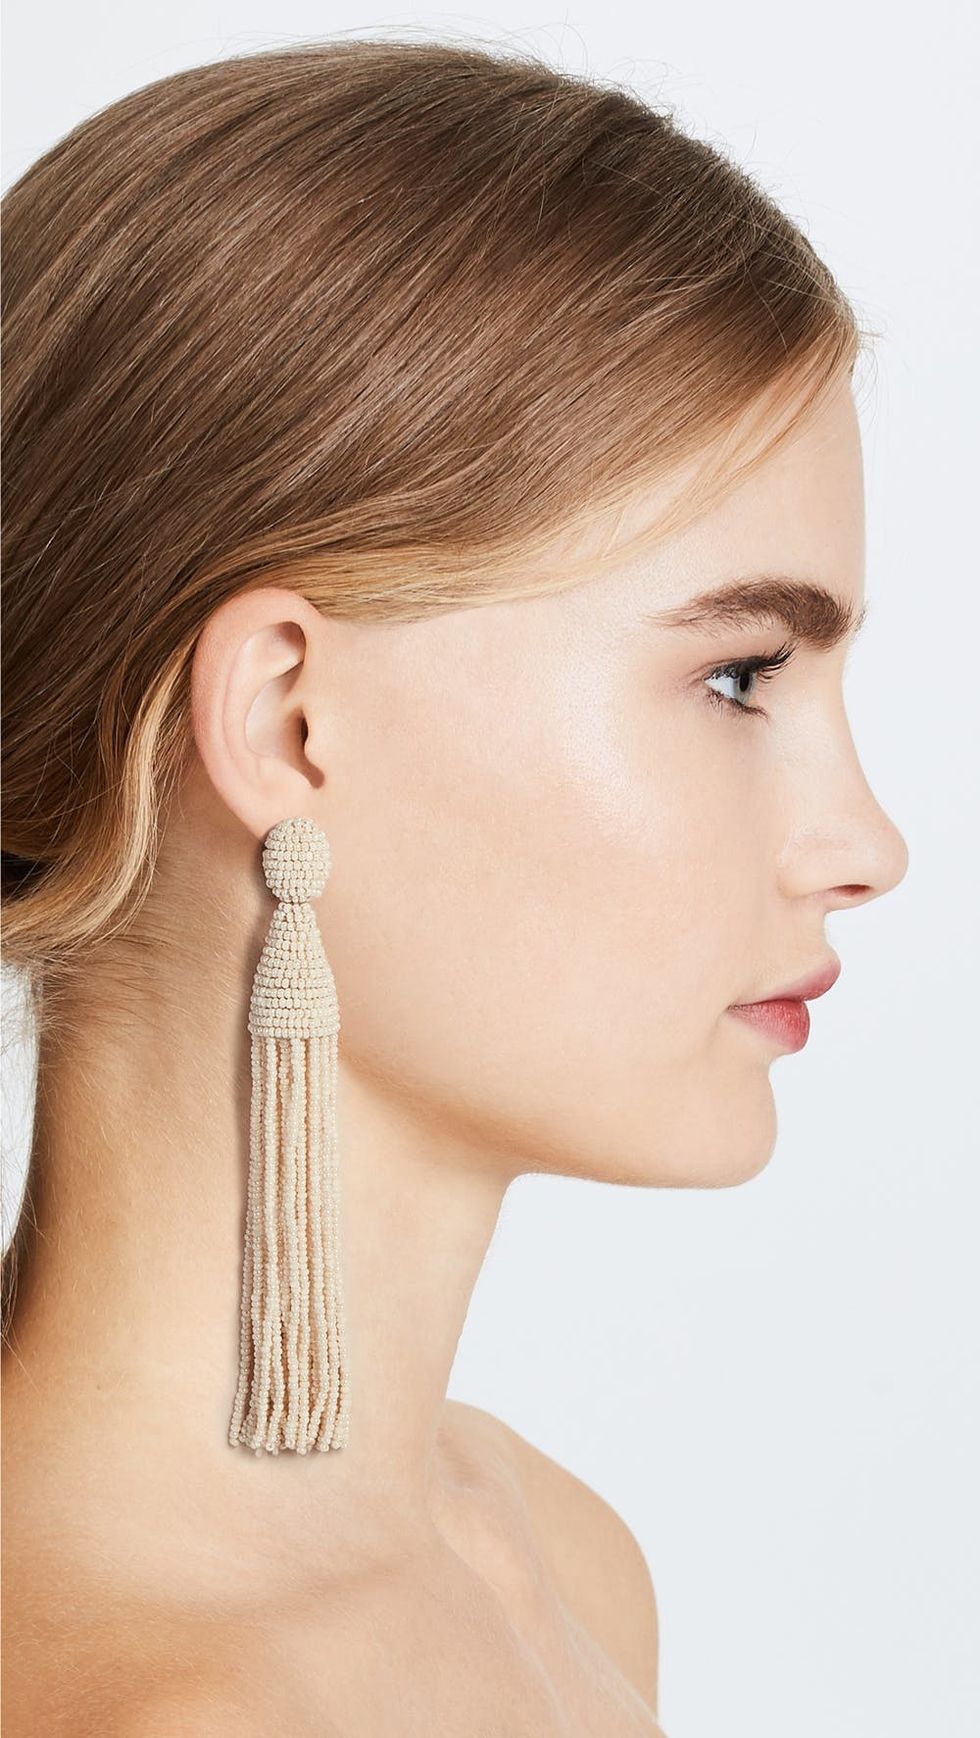 8 Long Earrings That Are Perfect for Spring Wedding Guests - Brit + Co